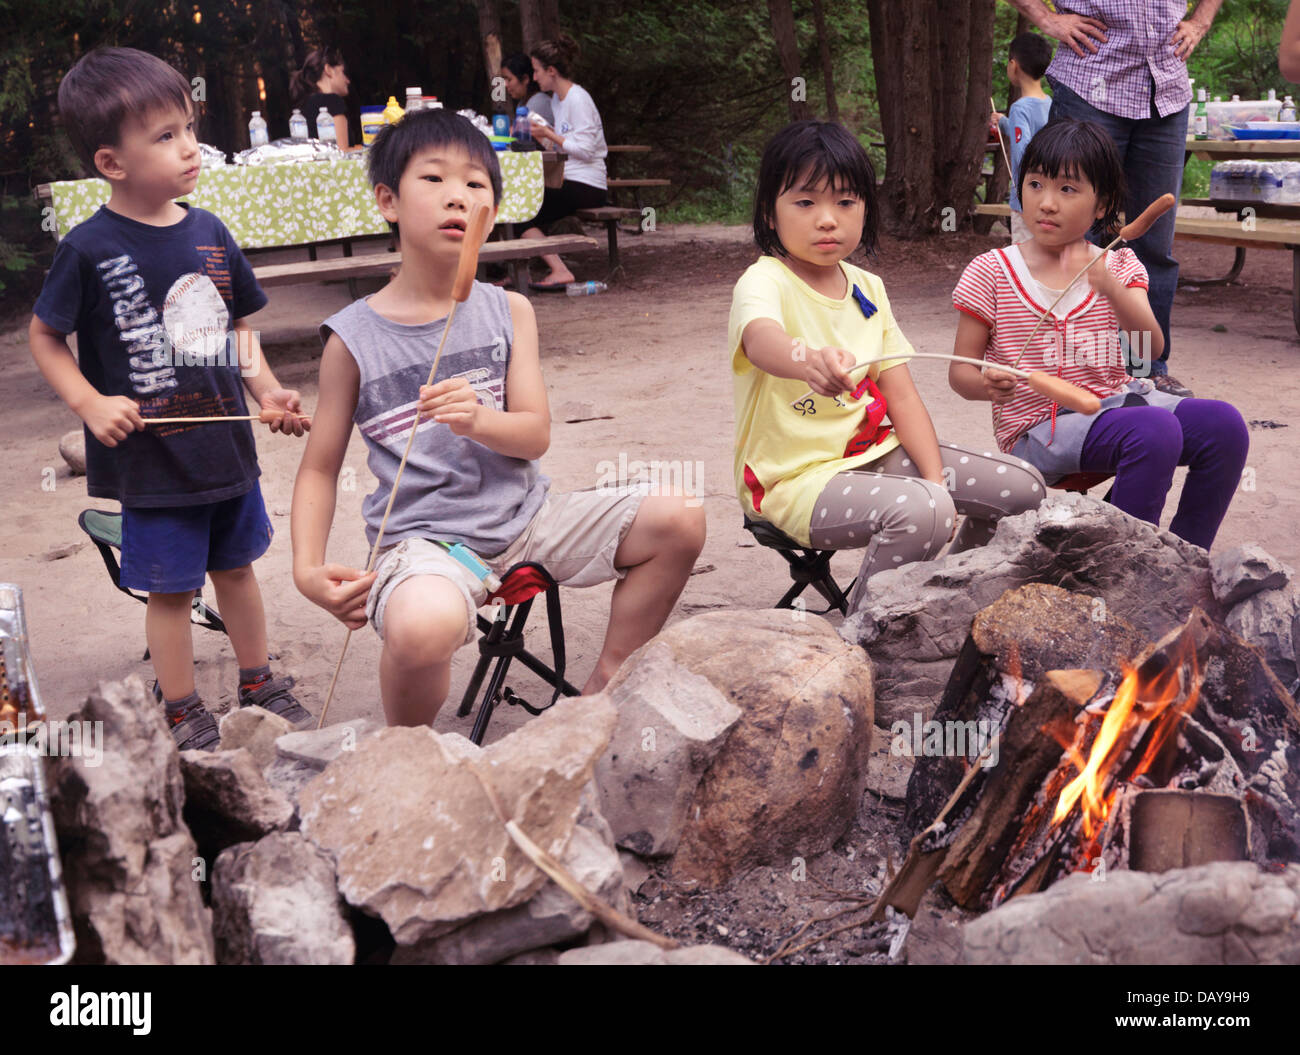 Kids cooking sausages on camp fire at a camping site in a park. Ontario, Canada. Stock Photo